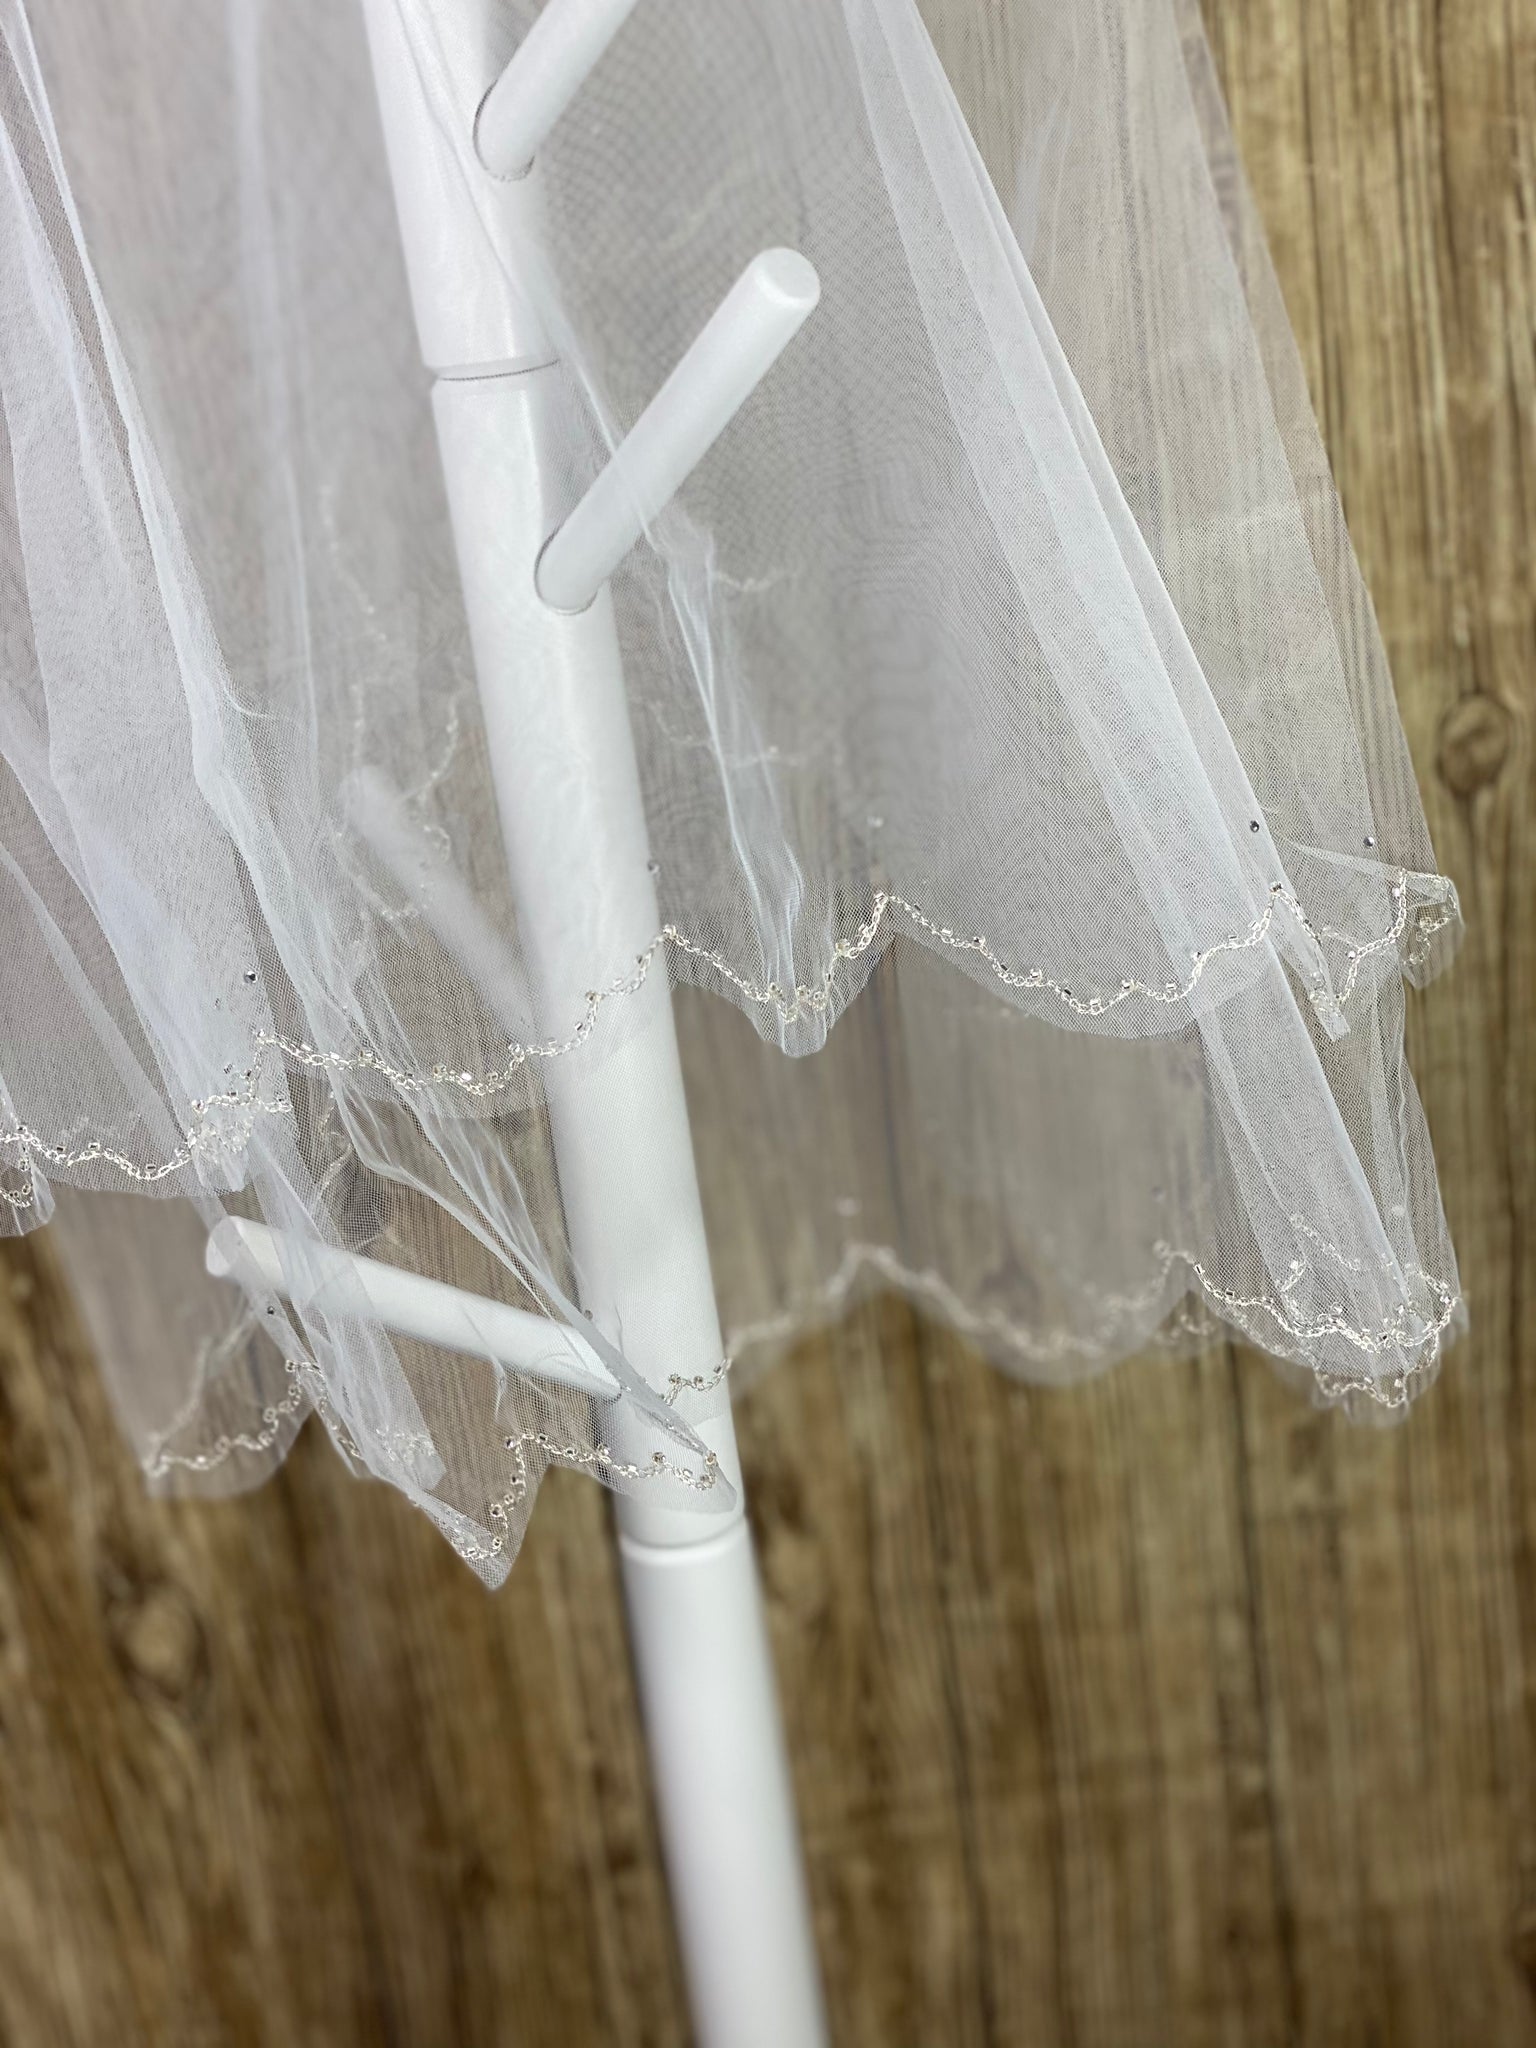 White - Scallop Jewel Veil for First Communion   Elegant soft 2 layer tulle veil with delicate hand stitched beads and scattered sequins.  Veil length - 29 in. long, comb - 11.5 cm wide  Materials:  sturdy plastic comb, soft tulle, and appliques - beads and sequins.